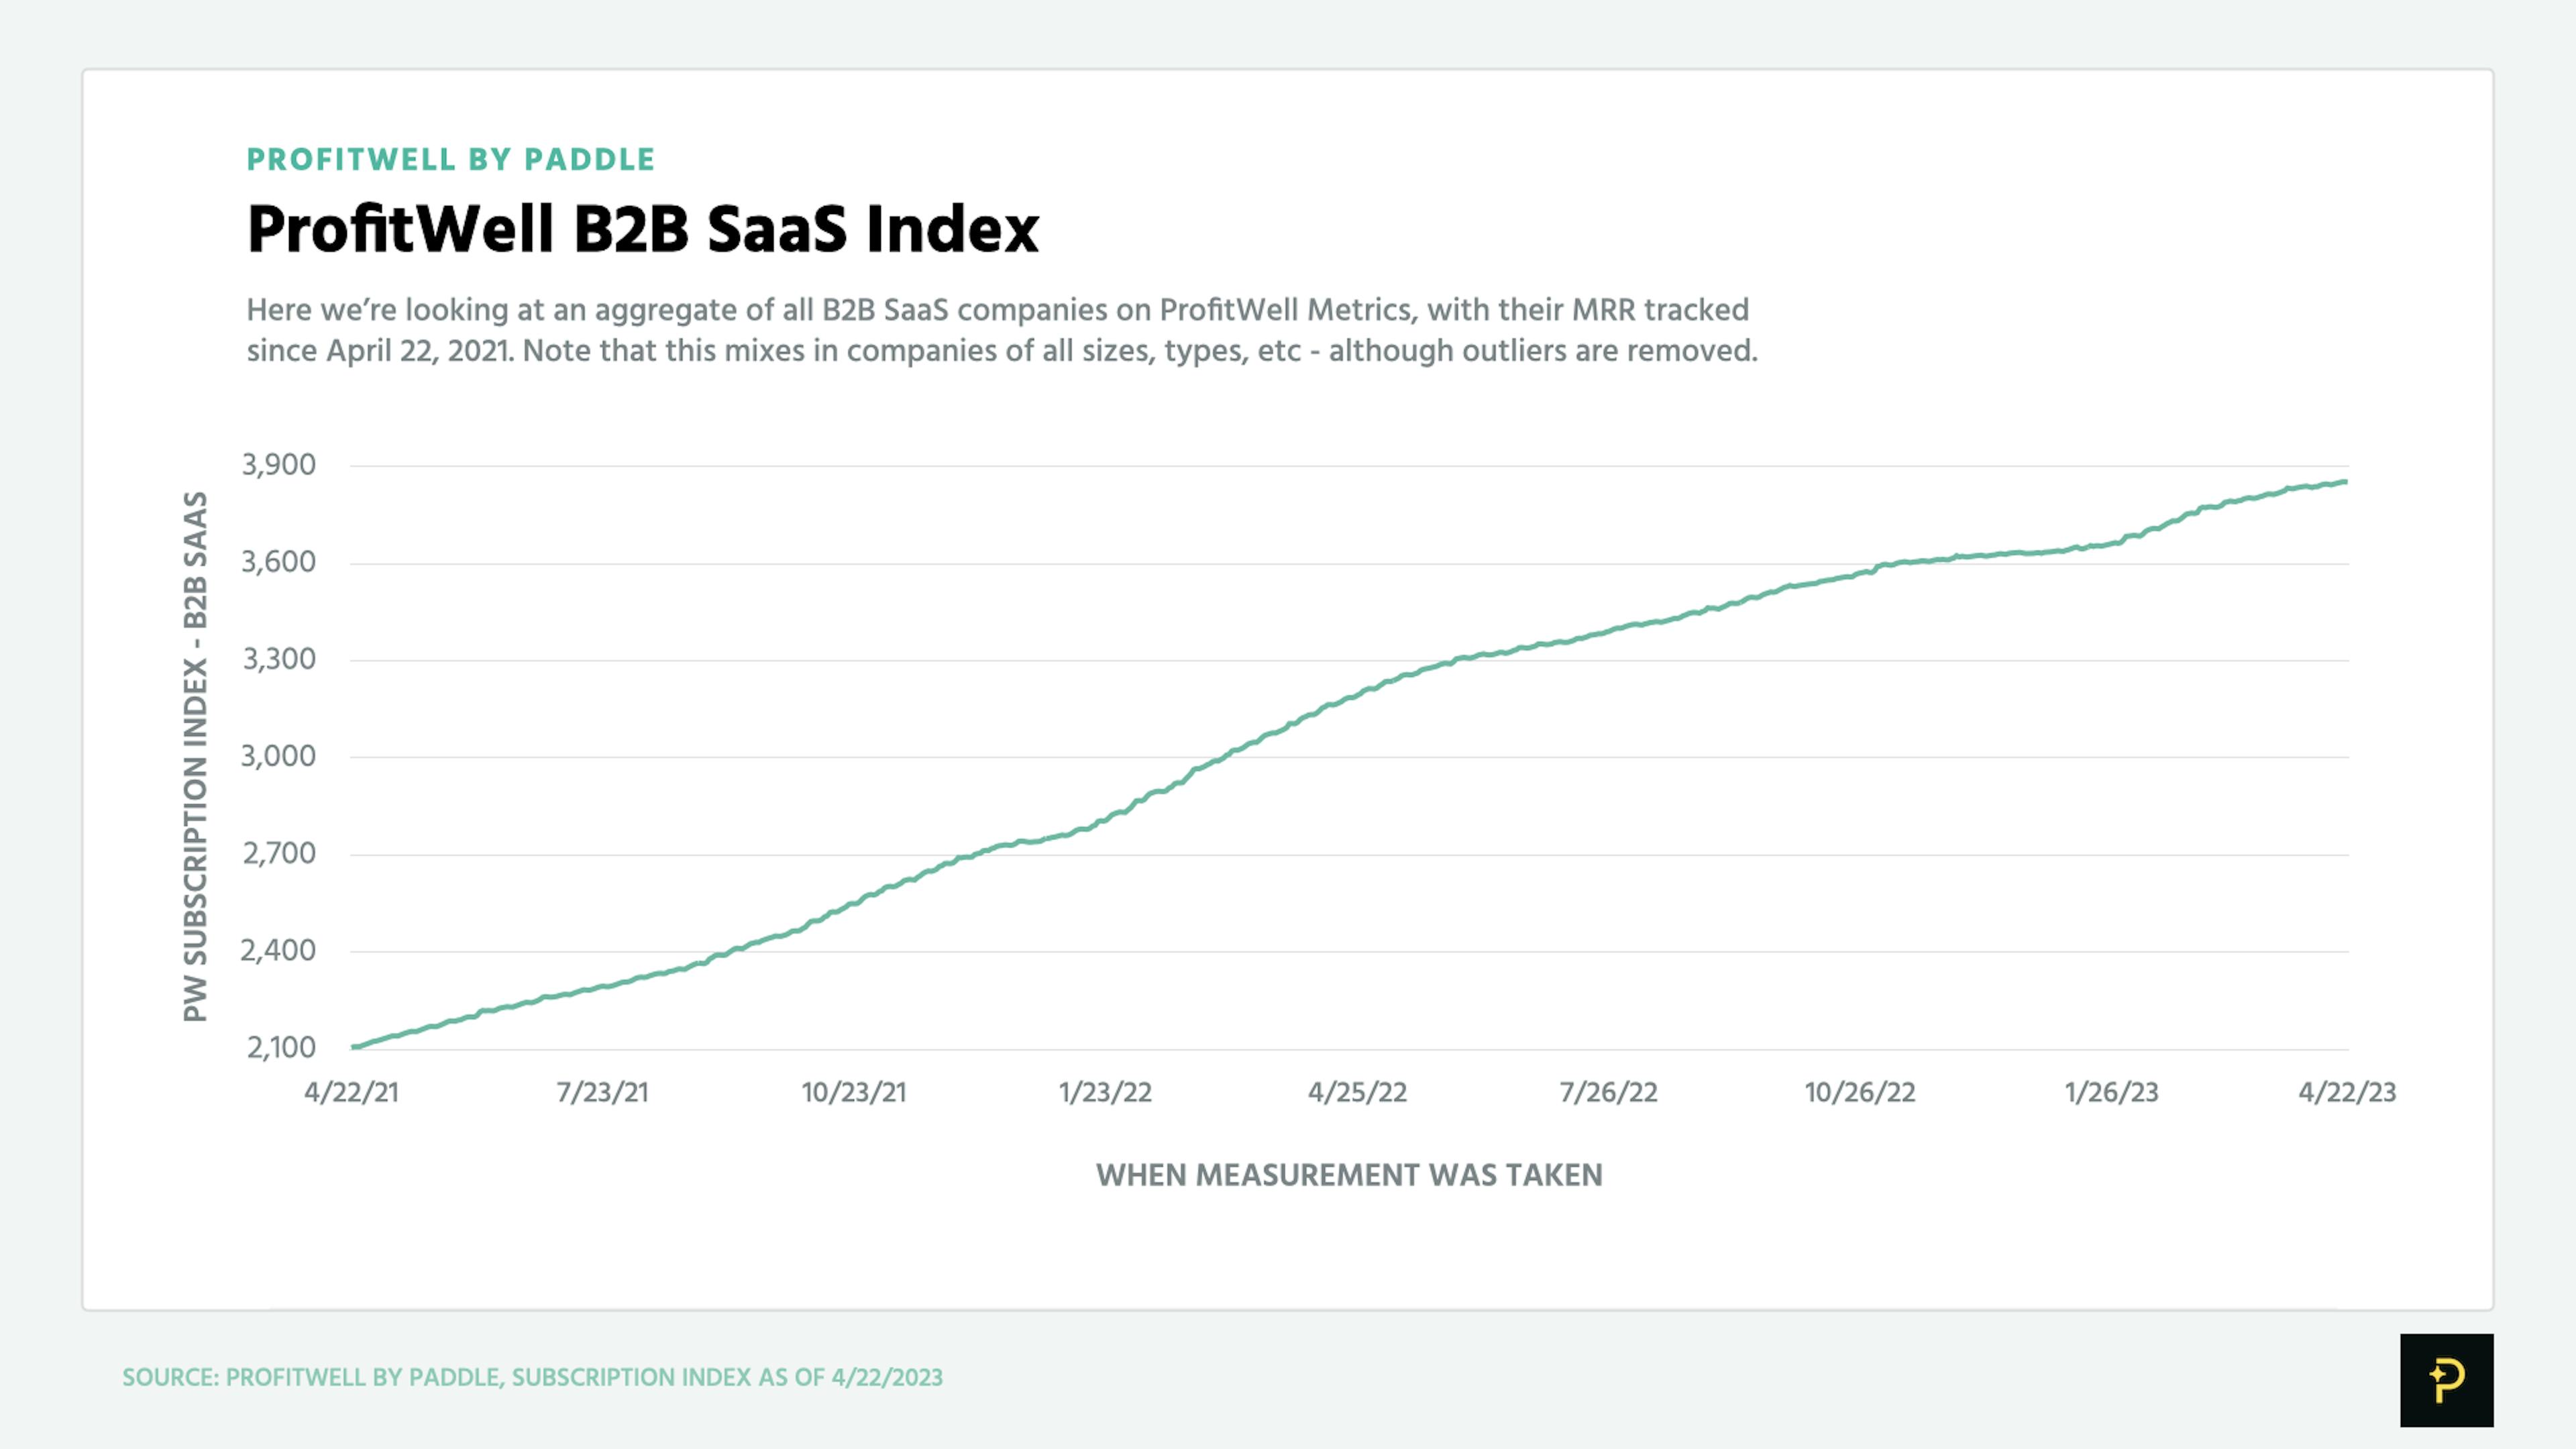 Chart of the ProfitWell B2B SaaS Index, showing slowing growth in April 2023.